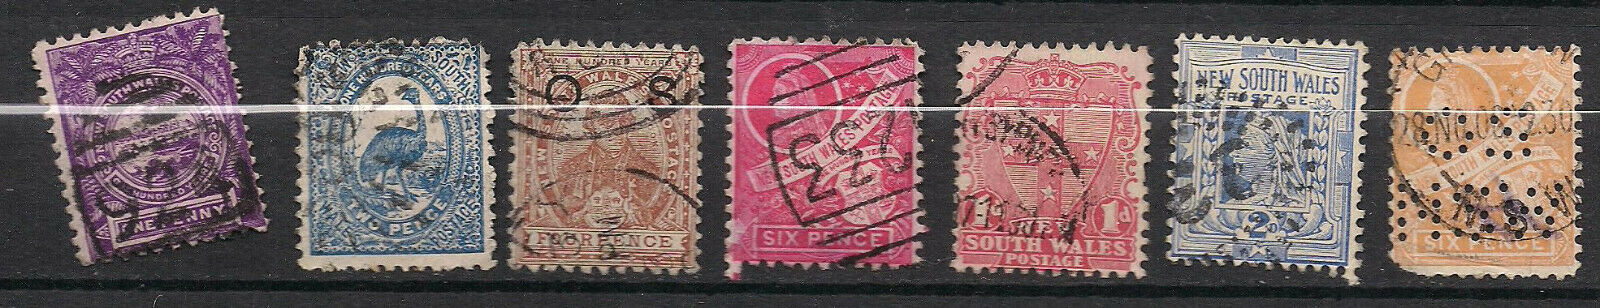 New South Wales - Lot #1. 19th Century Issues. Used. Some Faults